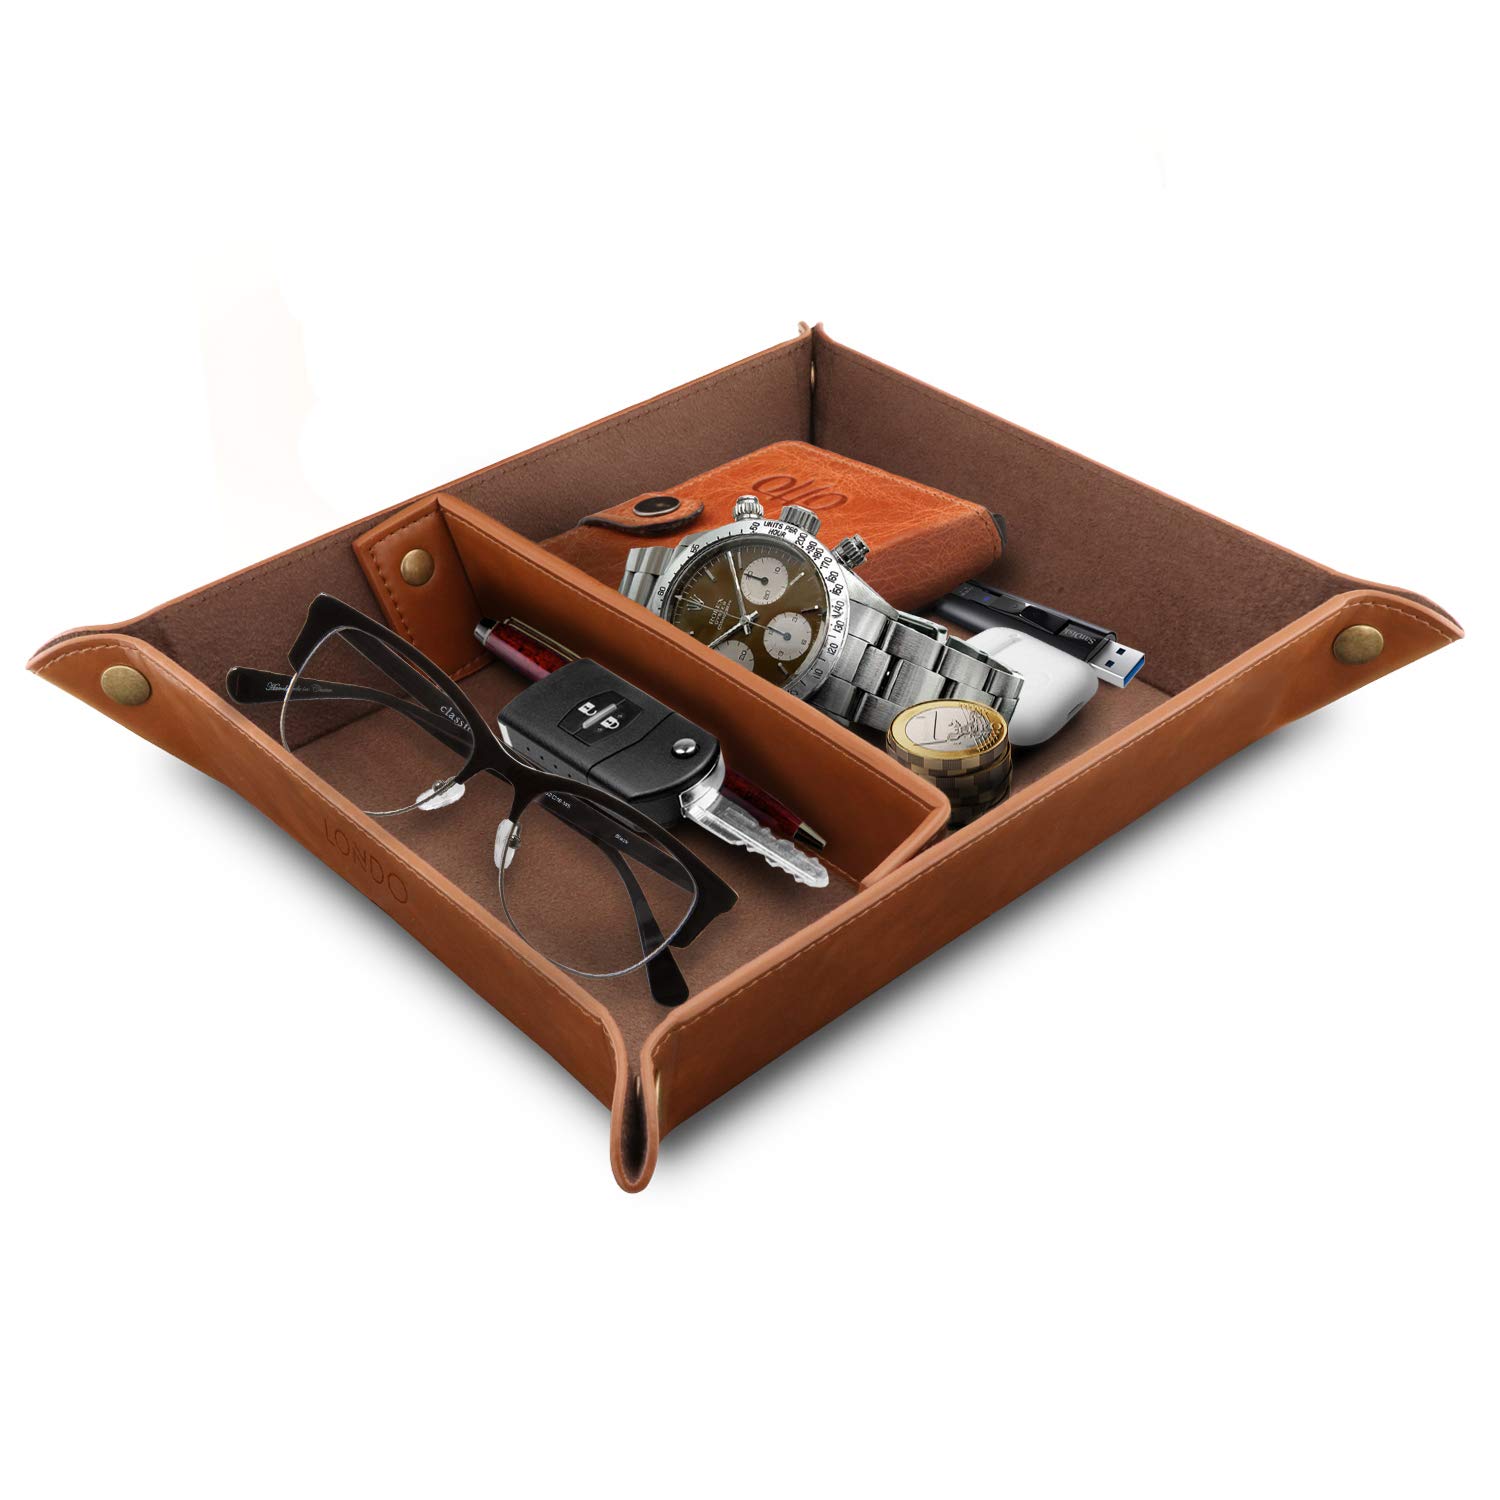 Londo Leather Tray Organizer - Practical Storage Box for Wallets, Watches, Keys, Coins, Cell Phones and Office Equipment